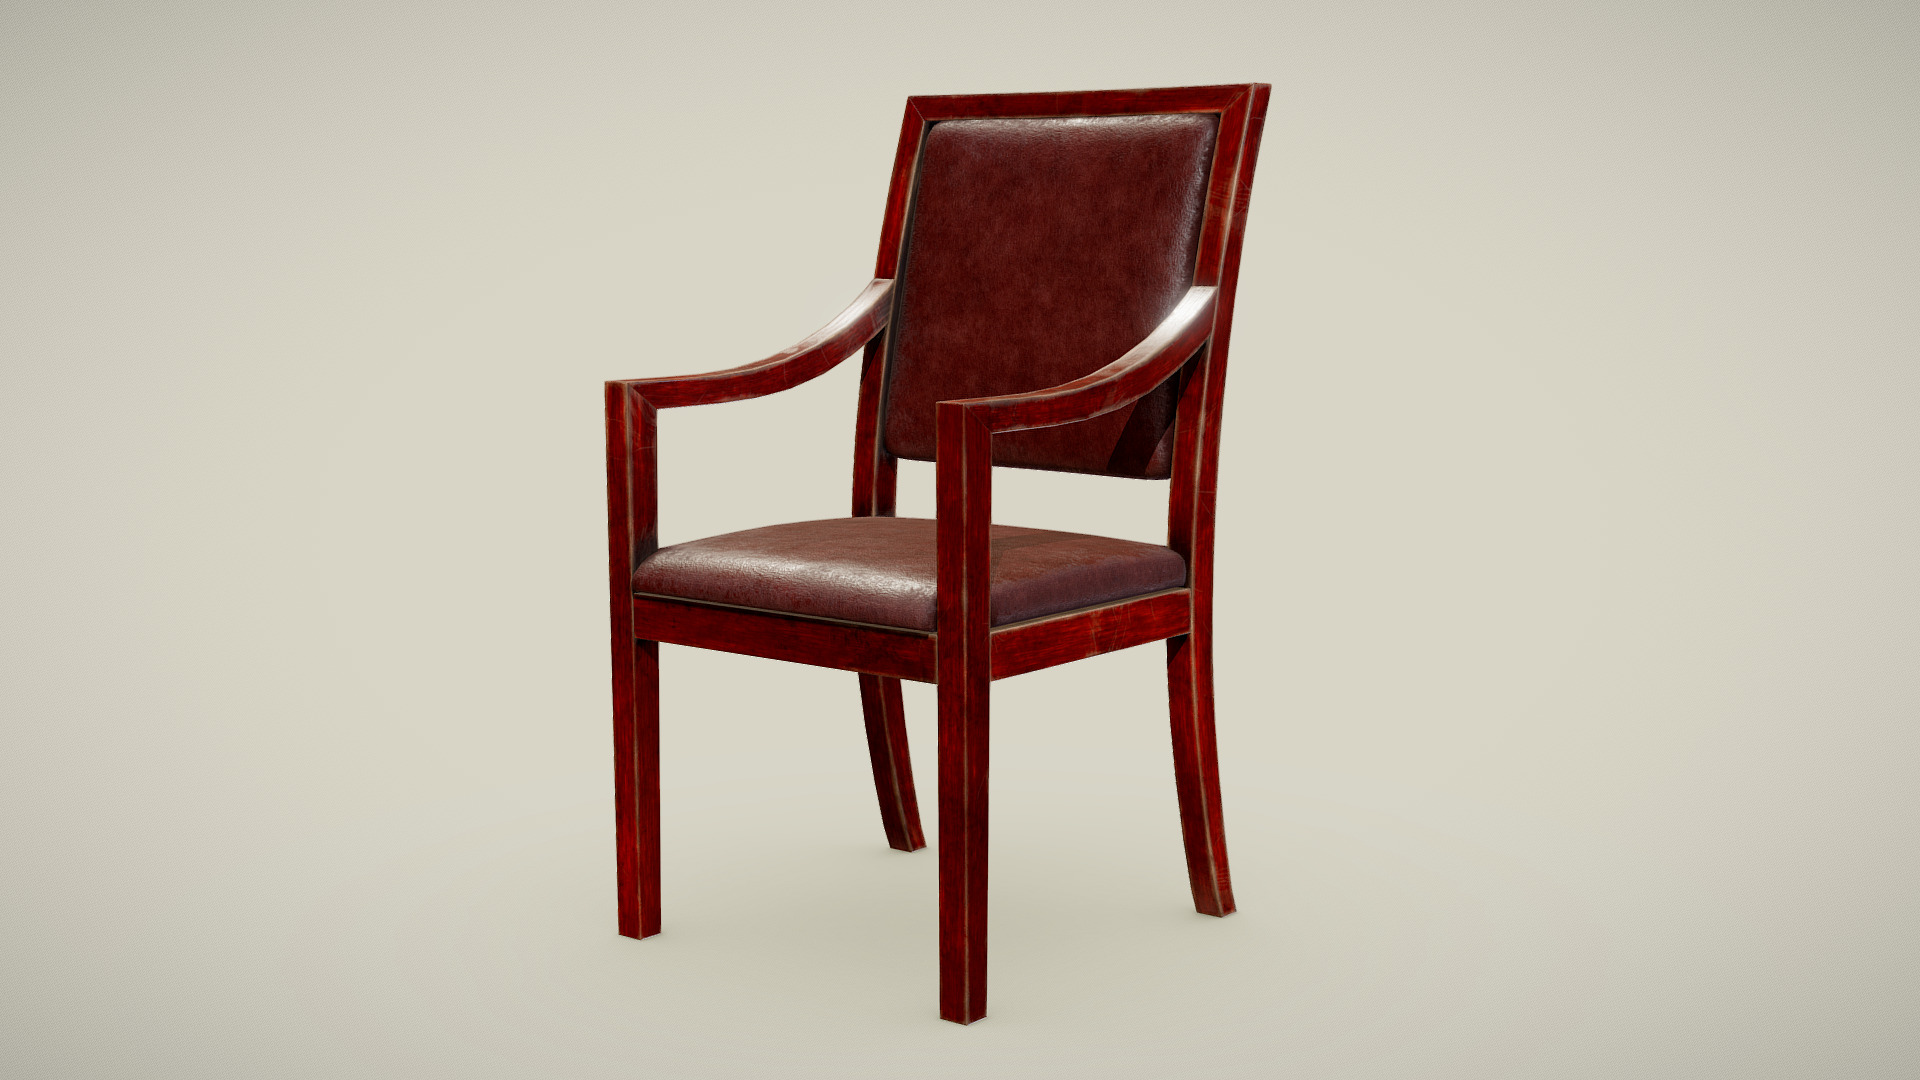 3D model Modus Chair - This is a 3D model of the Modus Chair. The 3D model is about a red chair against a white background.